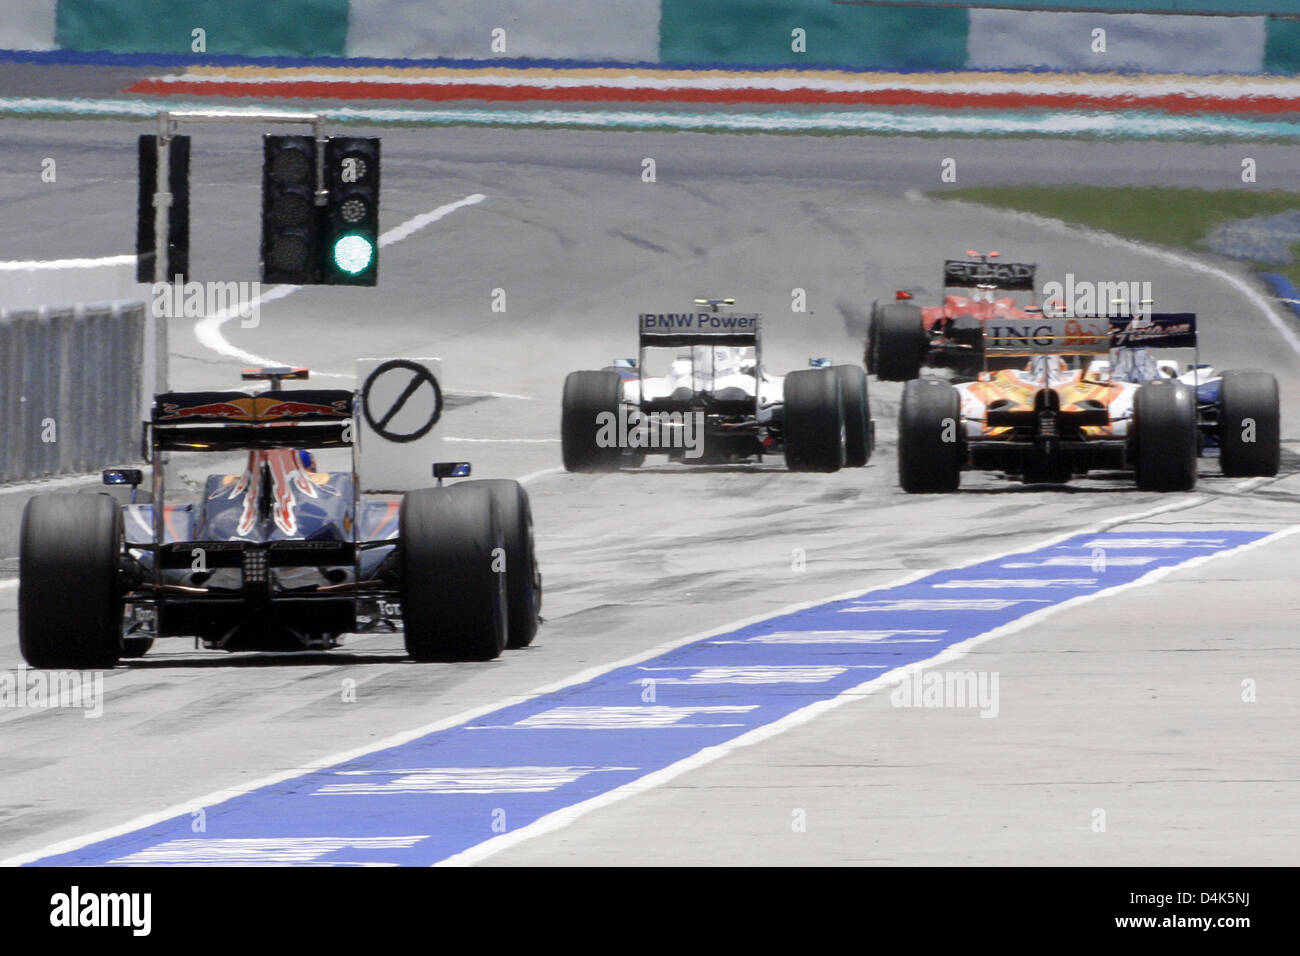 Drivers steer their cars onto the track during the second  training at Sepang circuit on the outskirts of Kuala Lumpur, Malaysia, 03 April 2009. The 2009 Formula One Malaysian Grand Prix will take place on Sunday 05 April. Photo: Jens Buettner Stock Photo